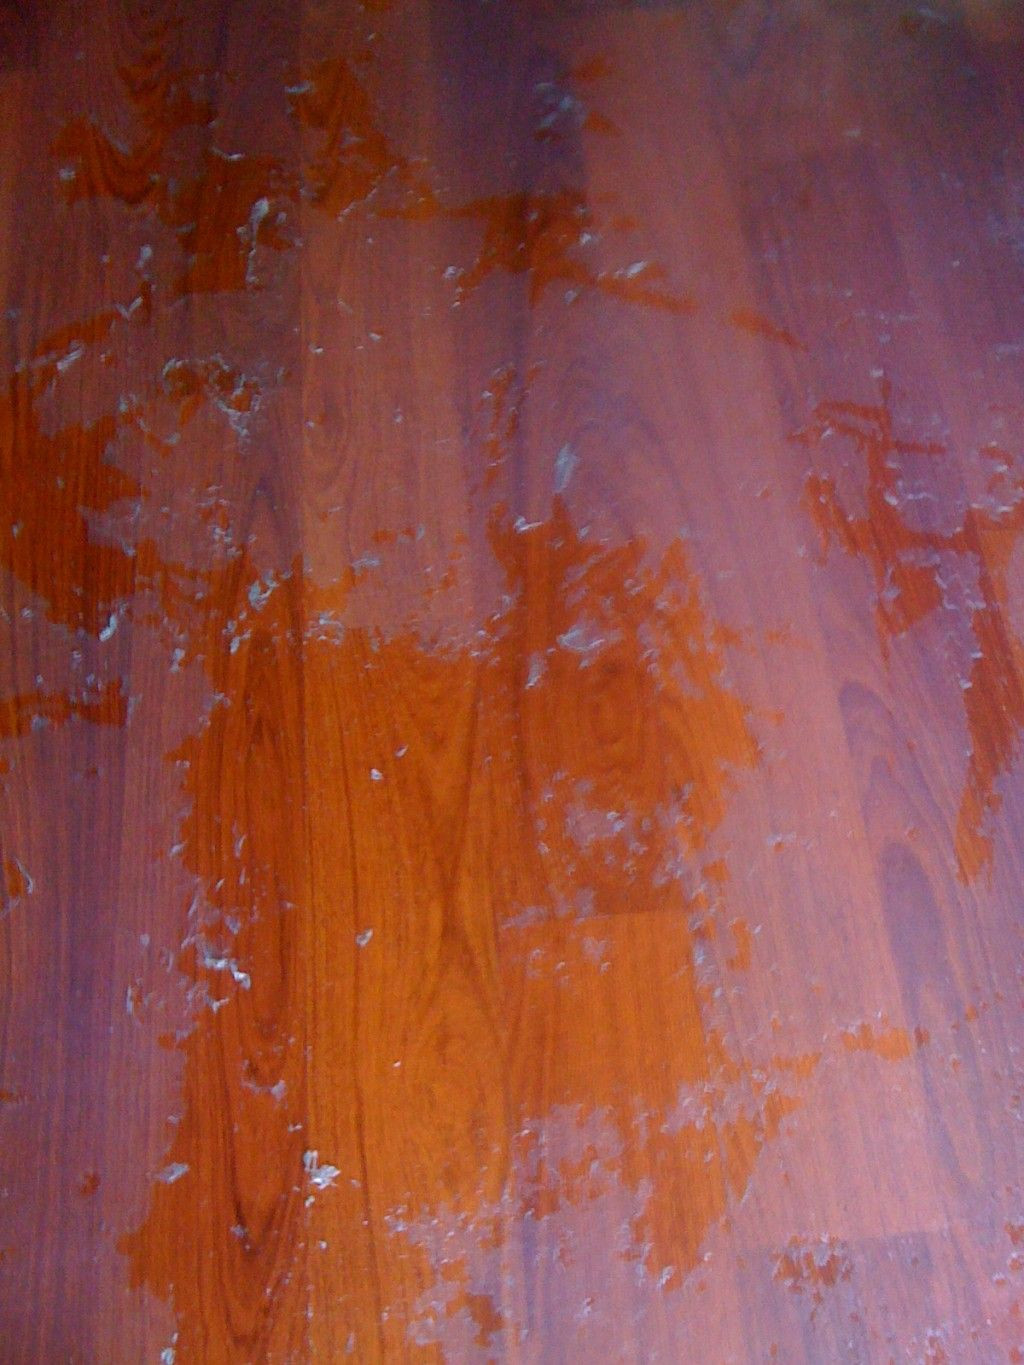 13 Lovable Hardwood Floor Scratch Repair 2024 free download hardwood floor scratch repair of how to remove wax and oil soap cleaners from wood floors recipes throughout how to remove oily or wax build up from cleaning or polishing solutions from wood